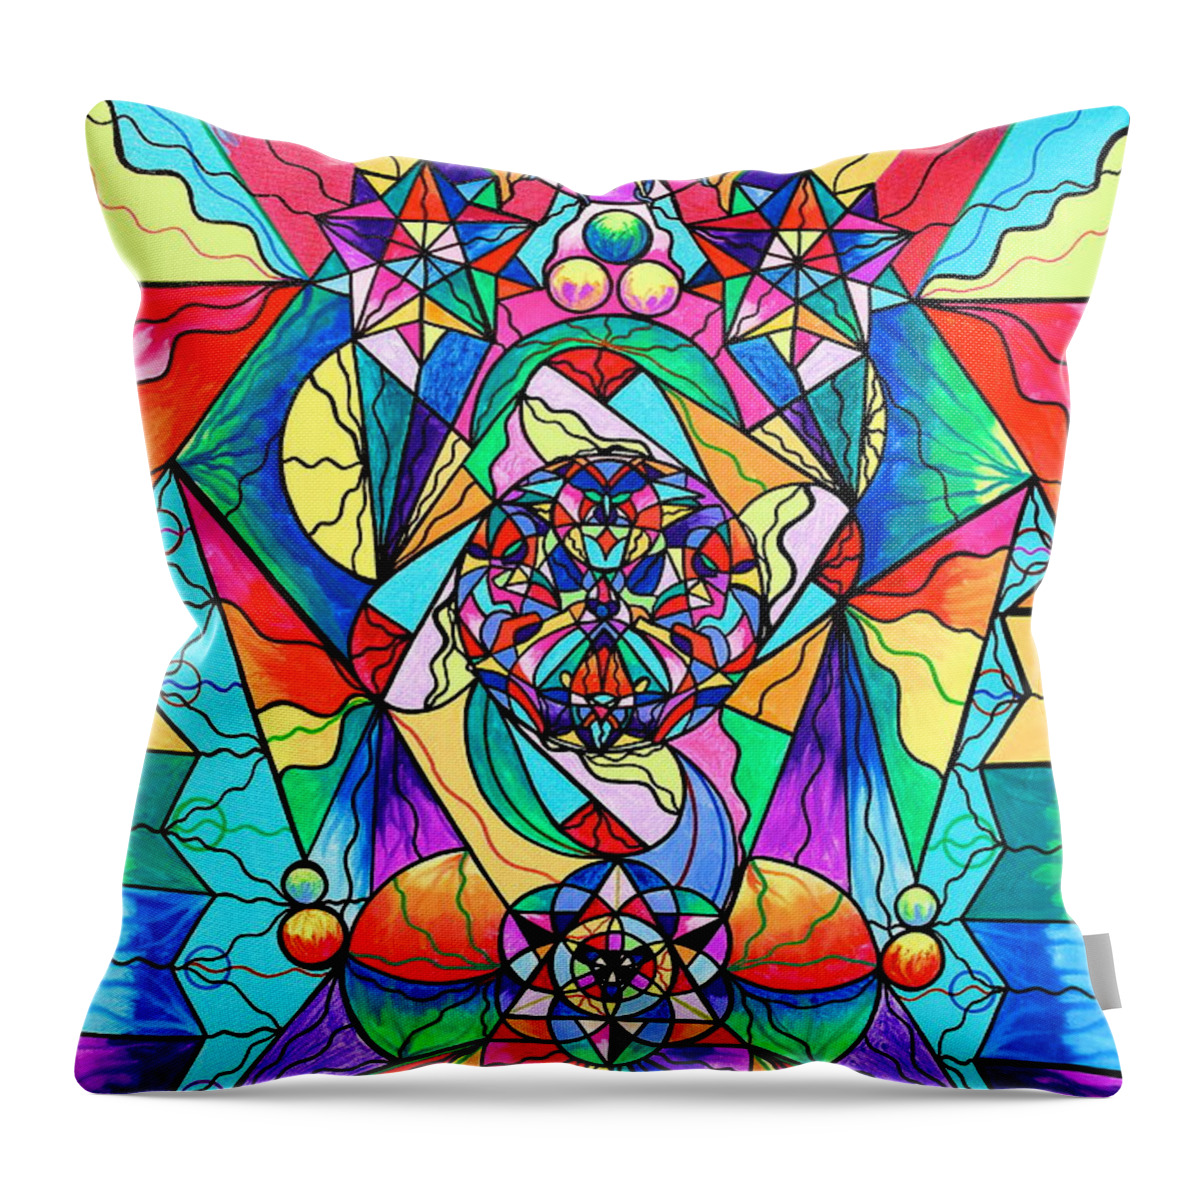 Vibration Throw Pillow featuring the painting Blue Ray Transcendence Grid by Teal Eye Print Store